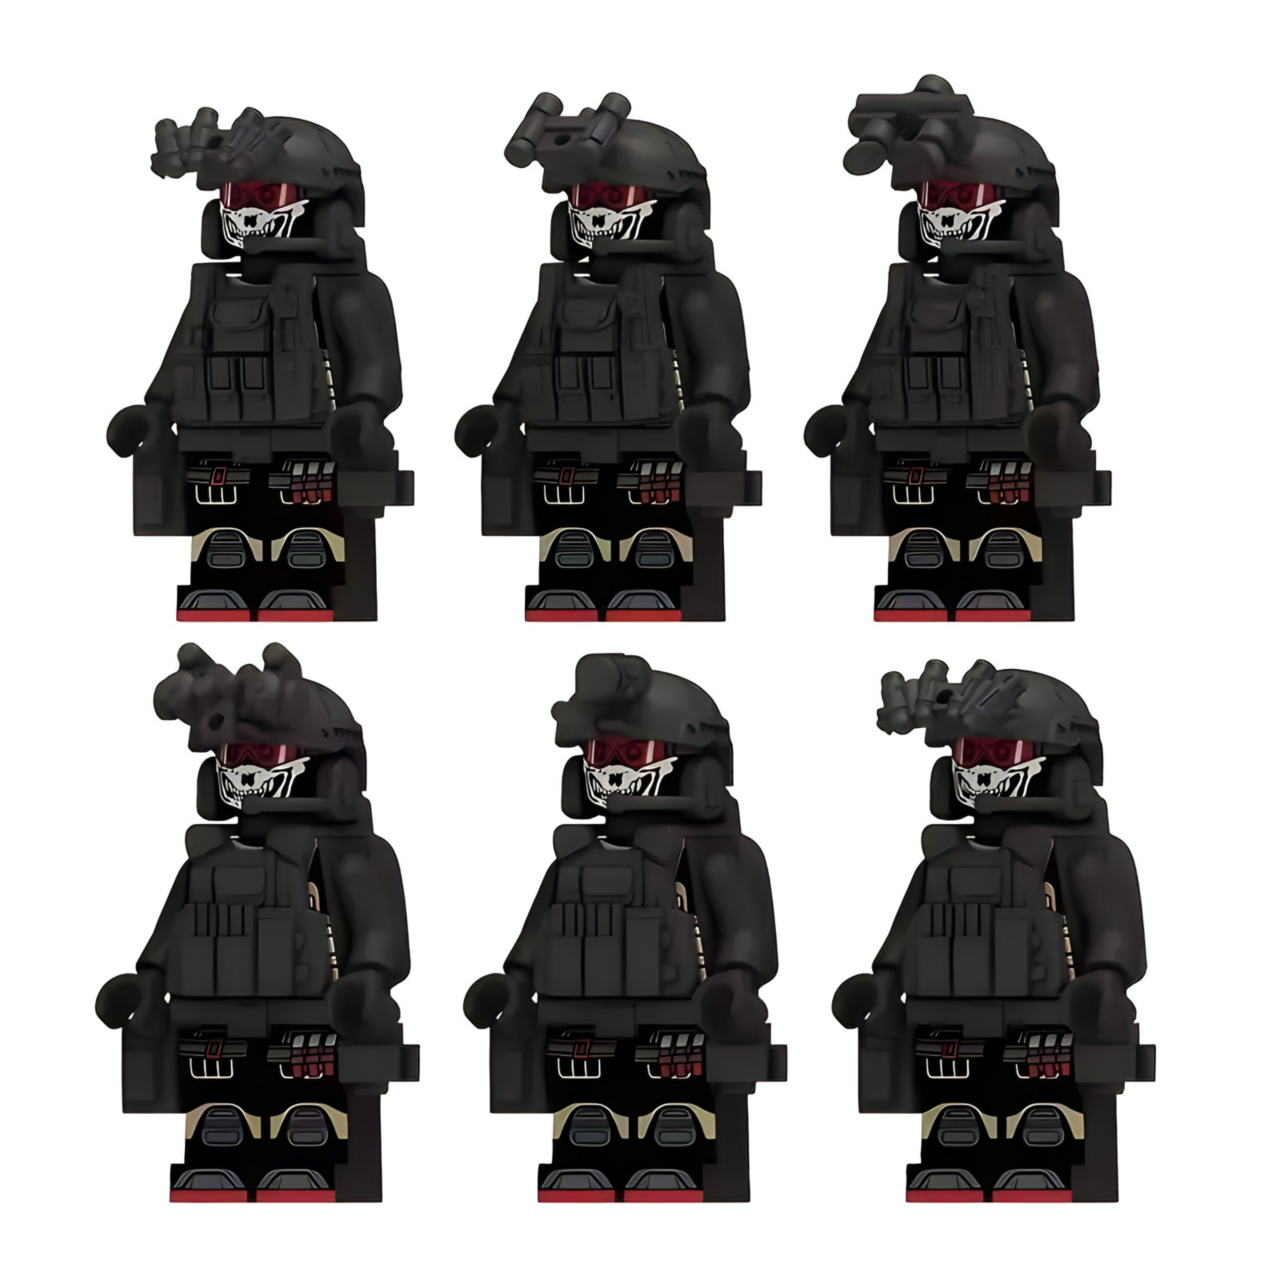 Elite Swat Team Minifigure Set of 6pcs With Assortment of Weapons 